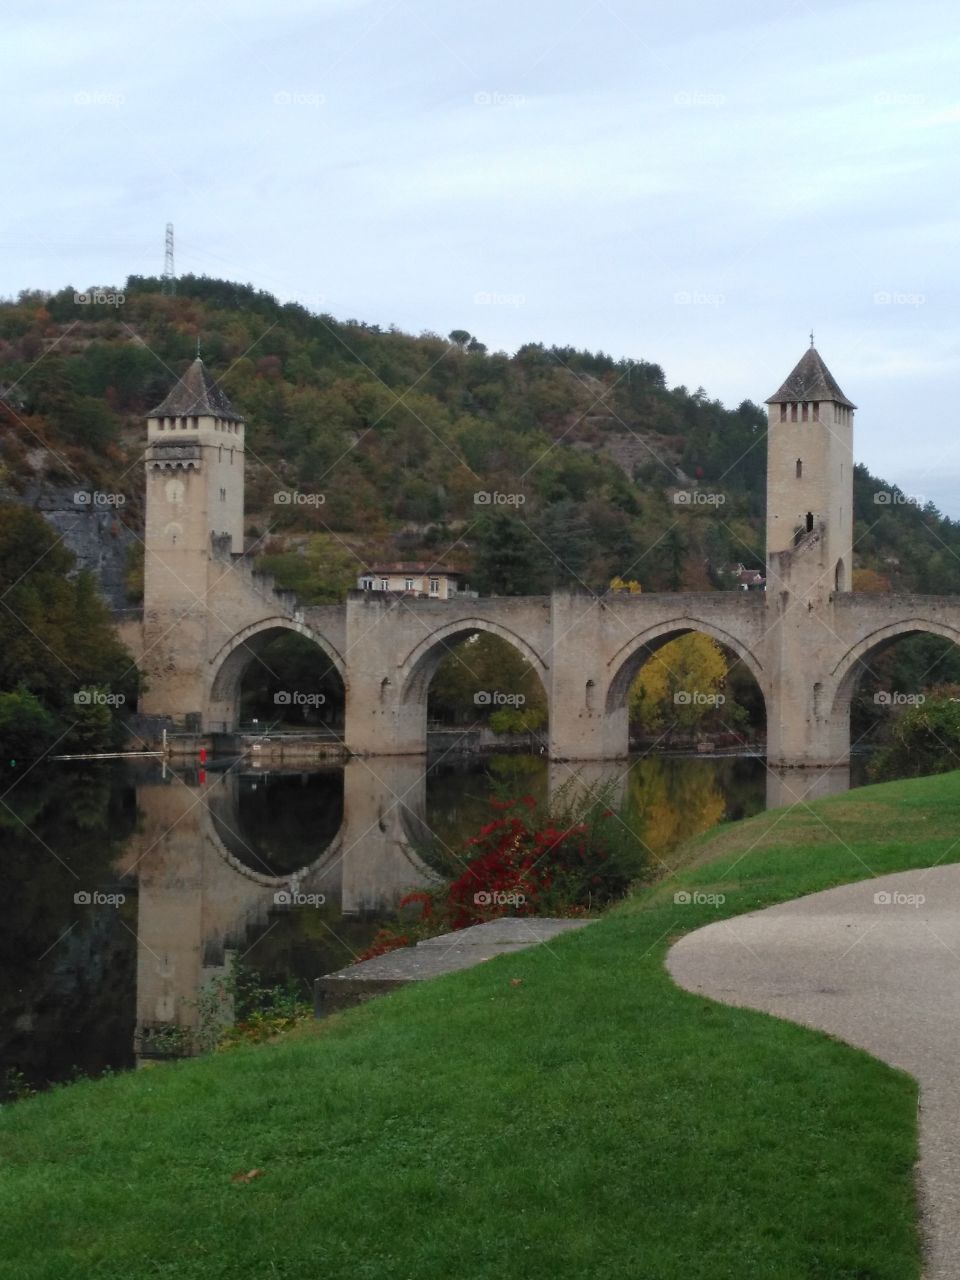 The bridge of Cahors, a town in France.